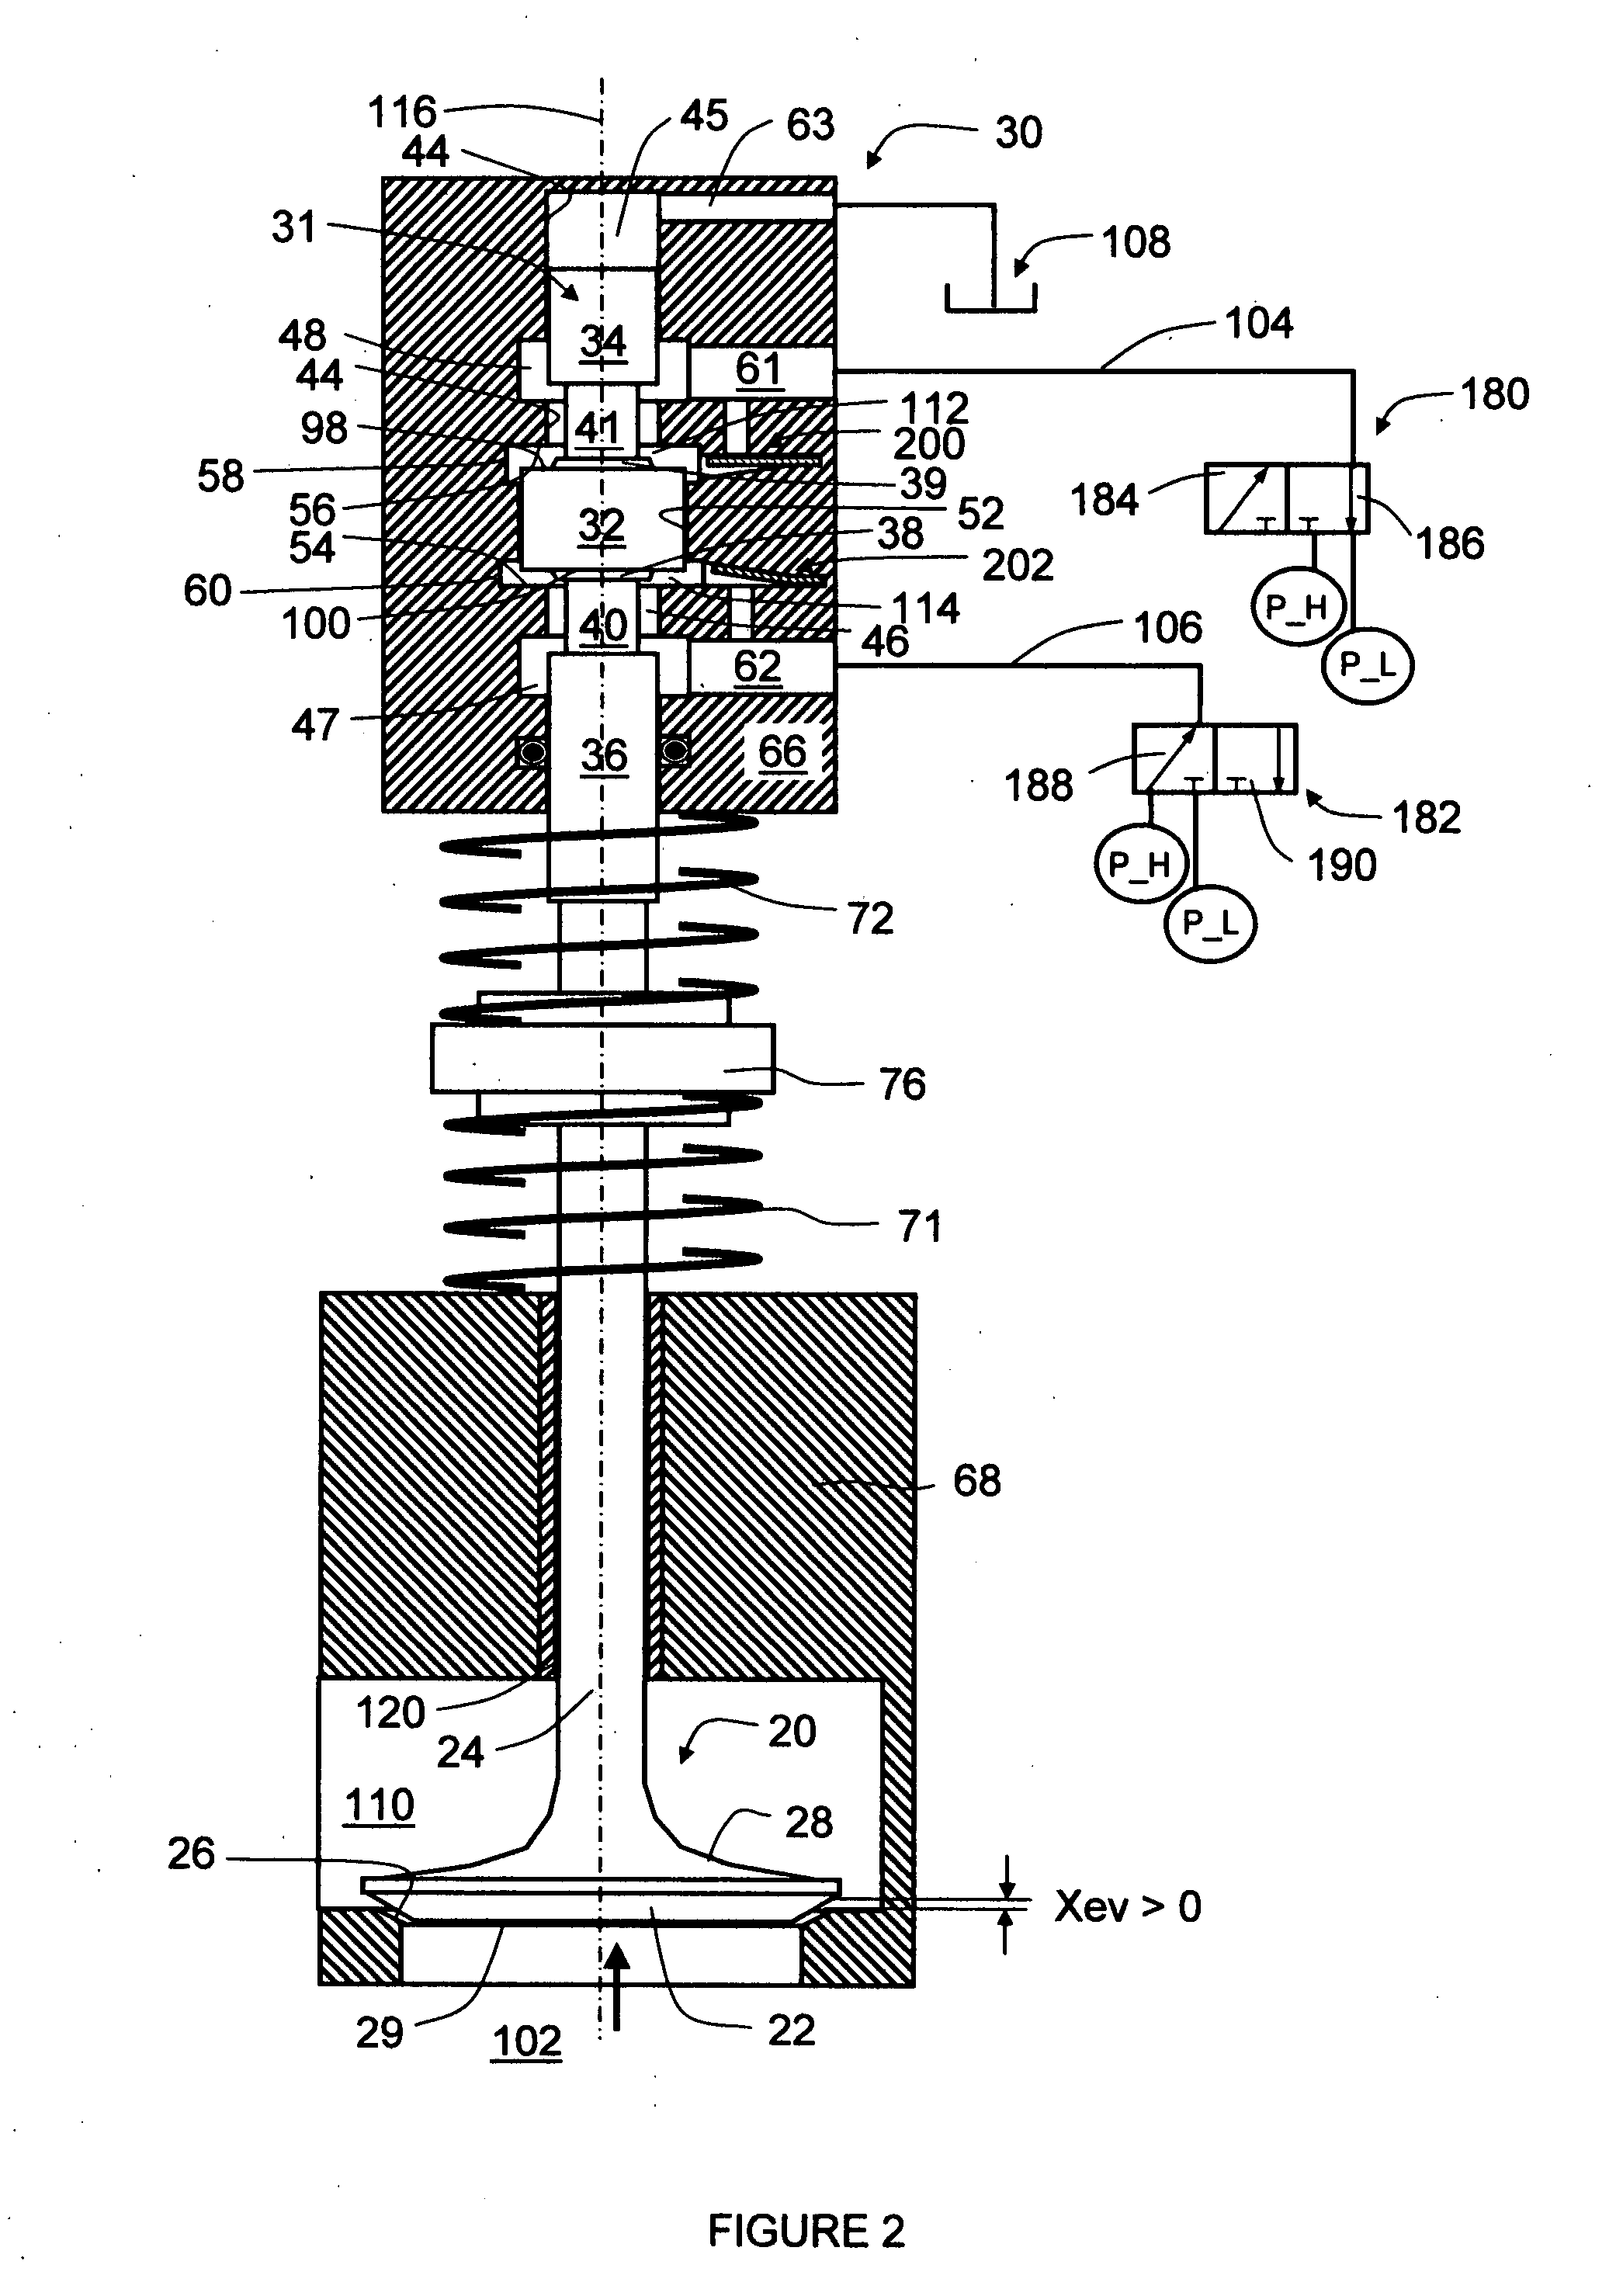 Variable valve actuator with latches at both ends